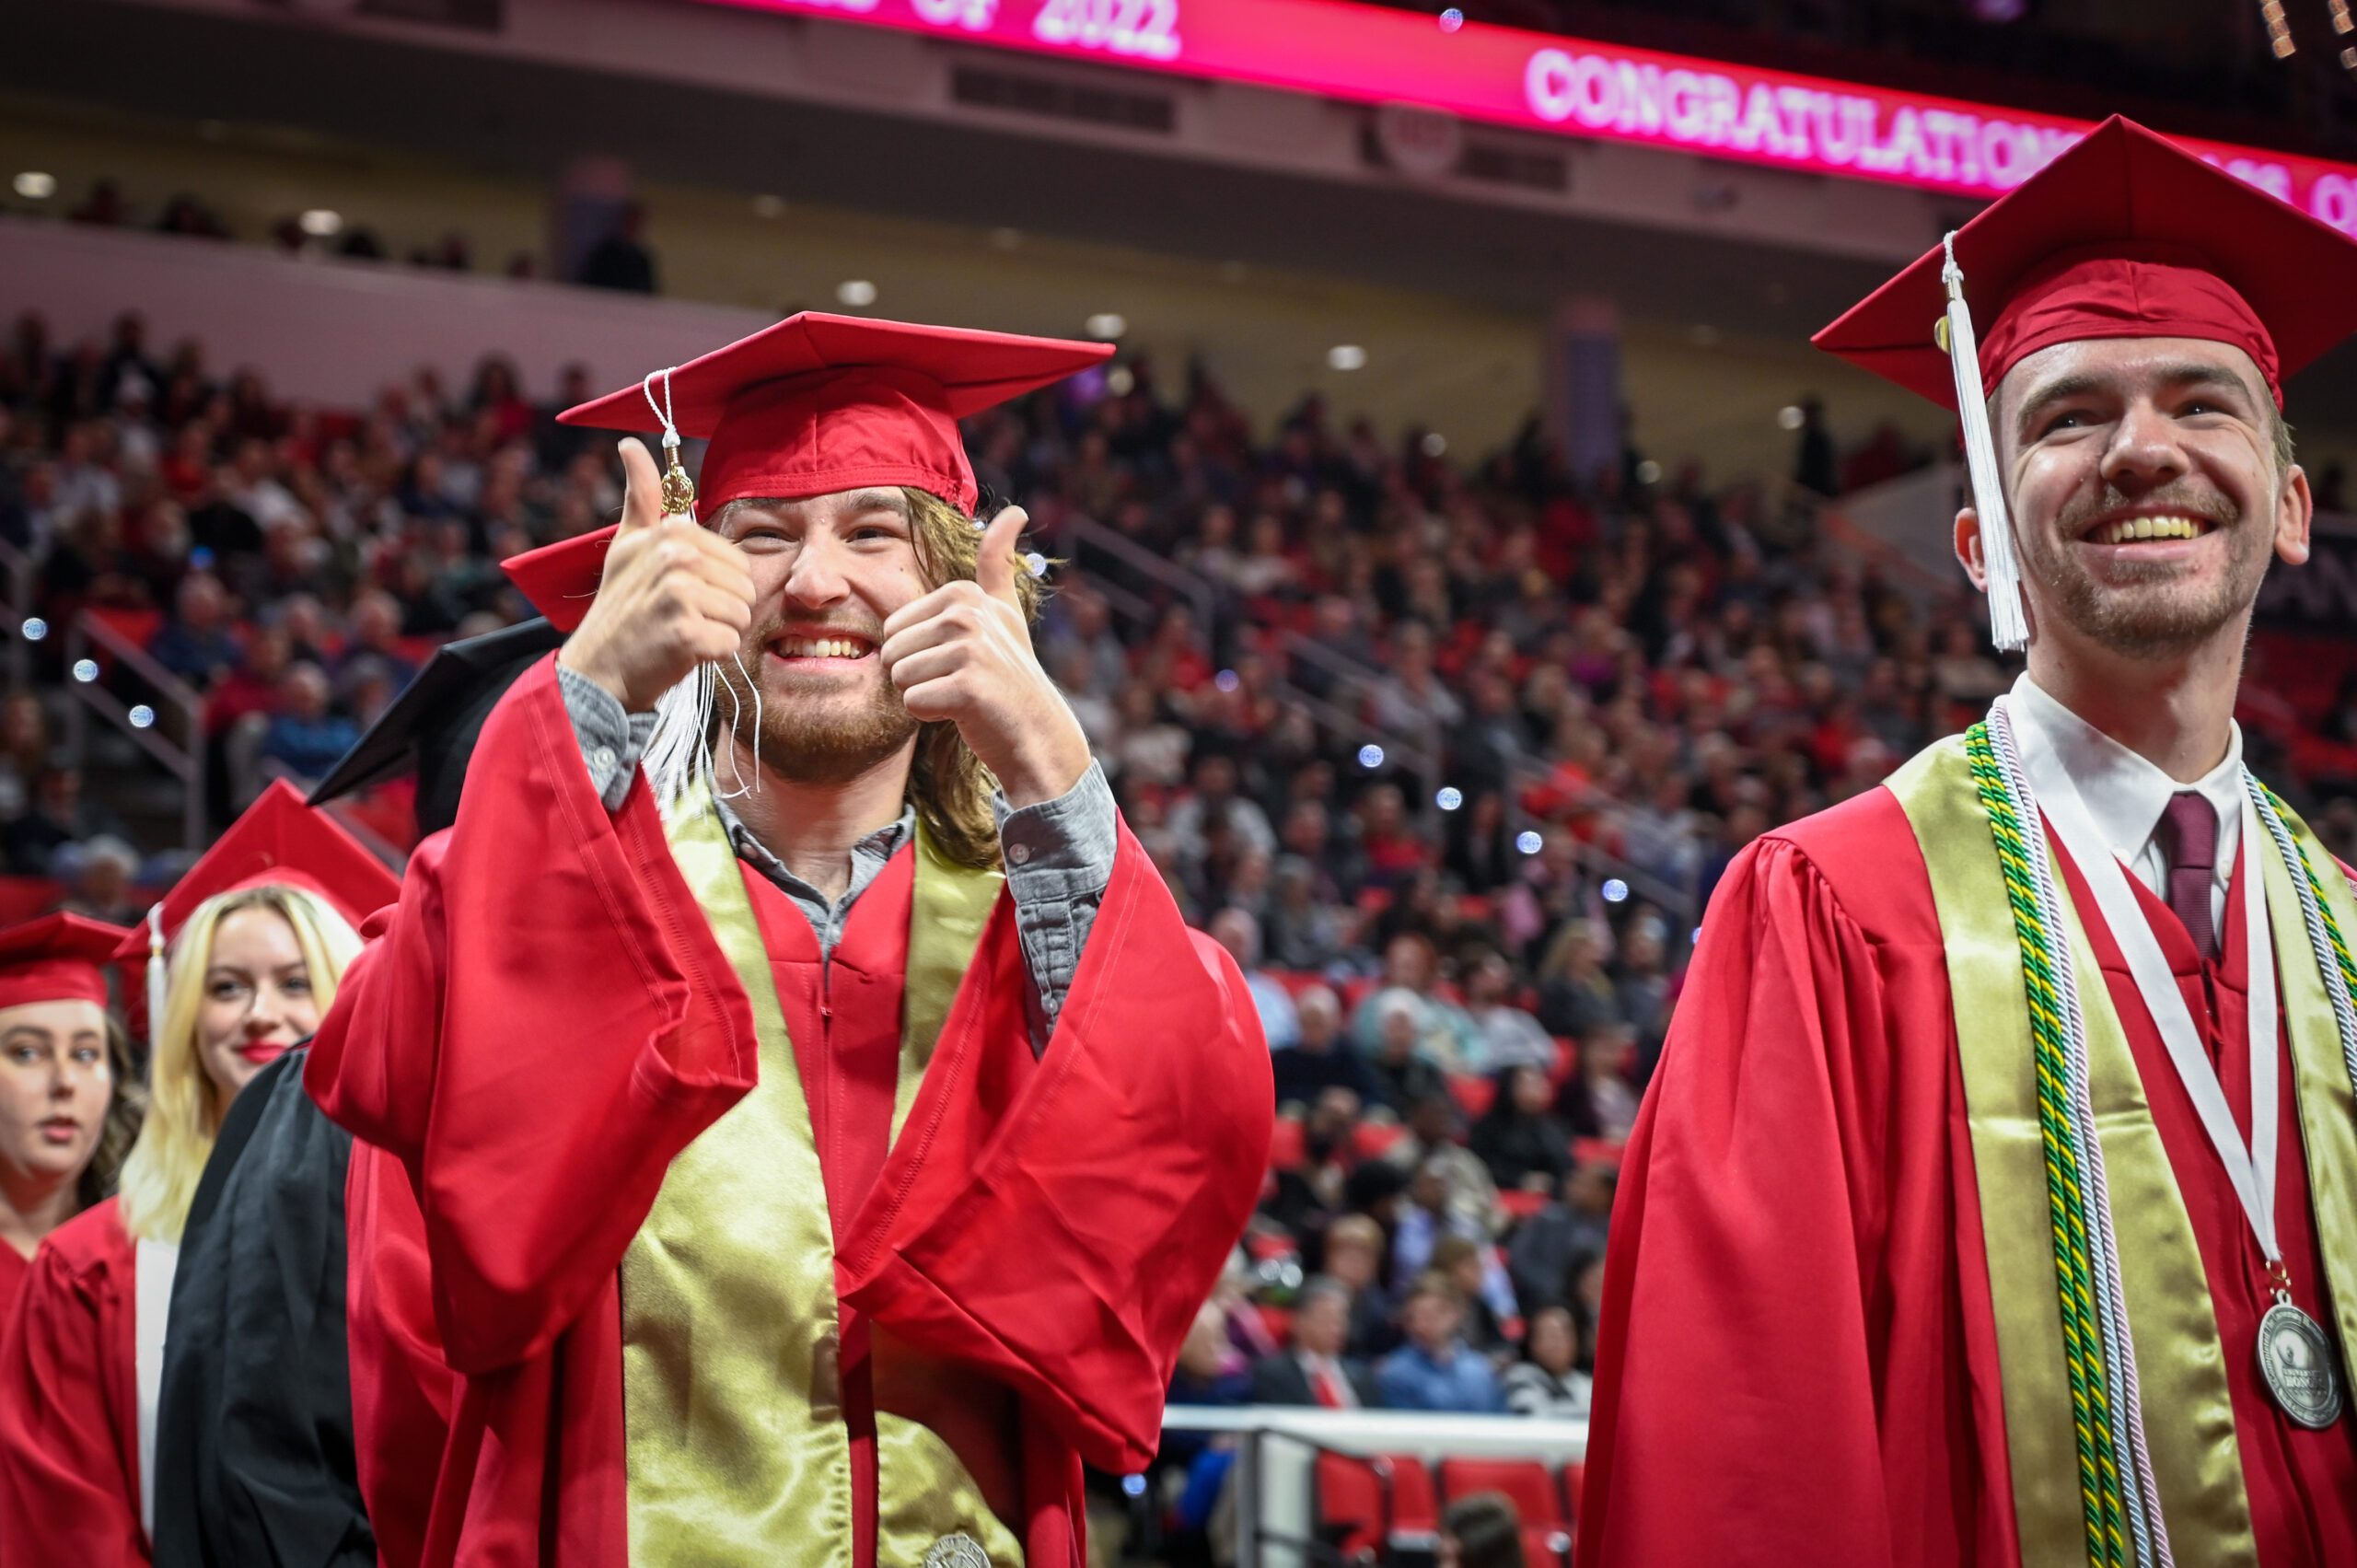 Student enter PNC Arena at Fall 2022 Commencement.